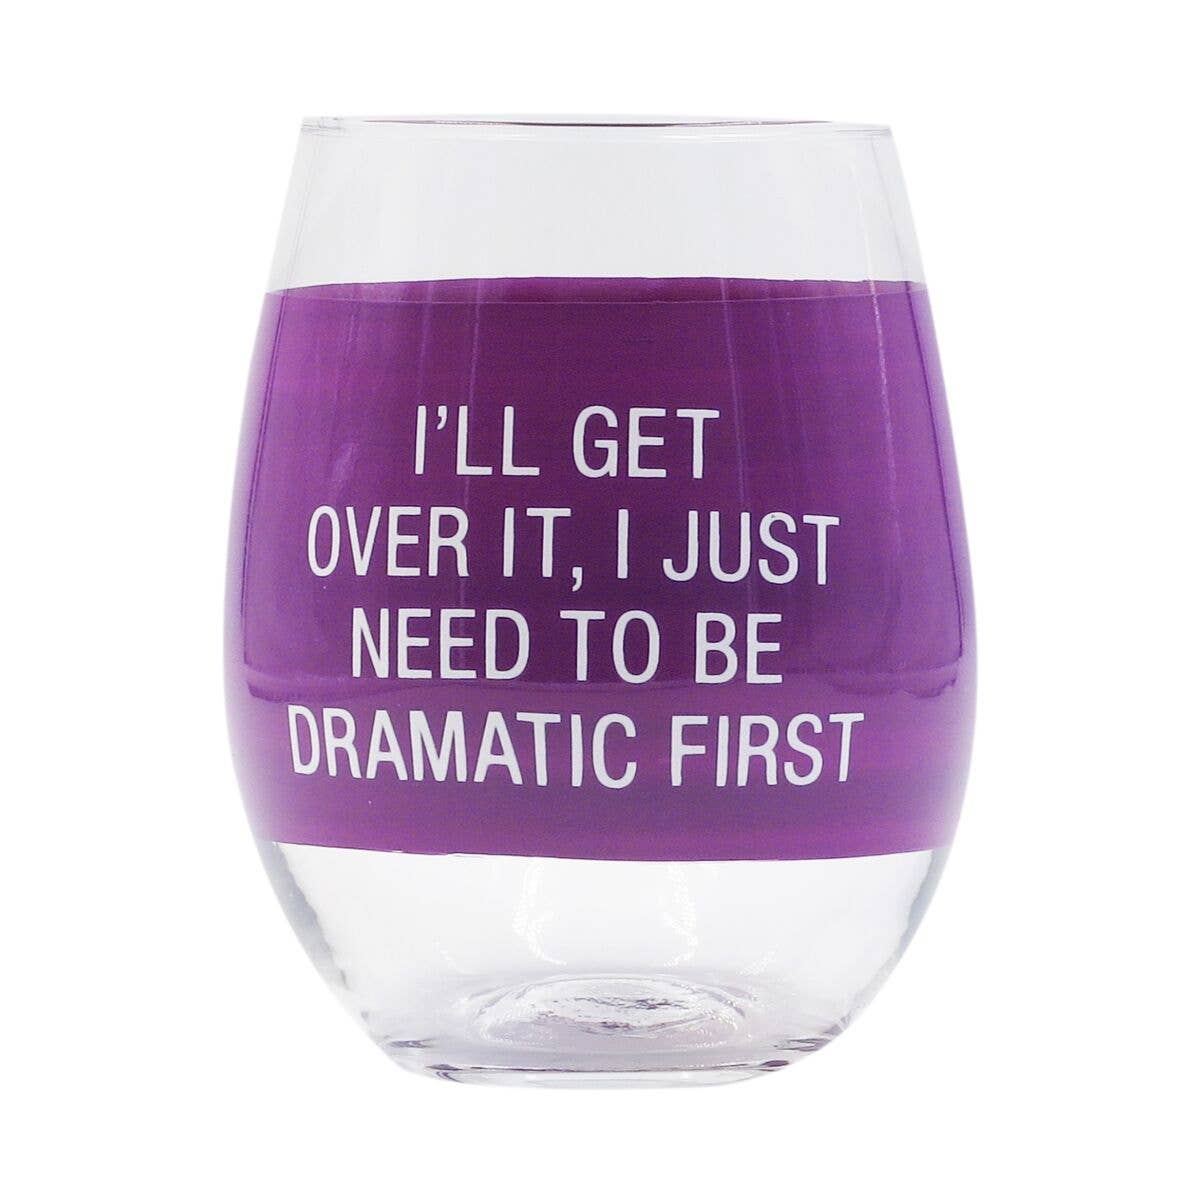 About Face Designs inc. I'll Get Over It Wine Glass